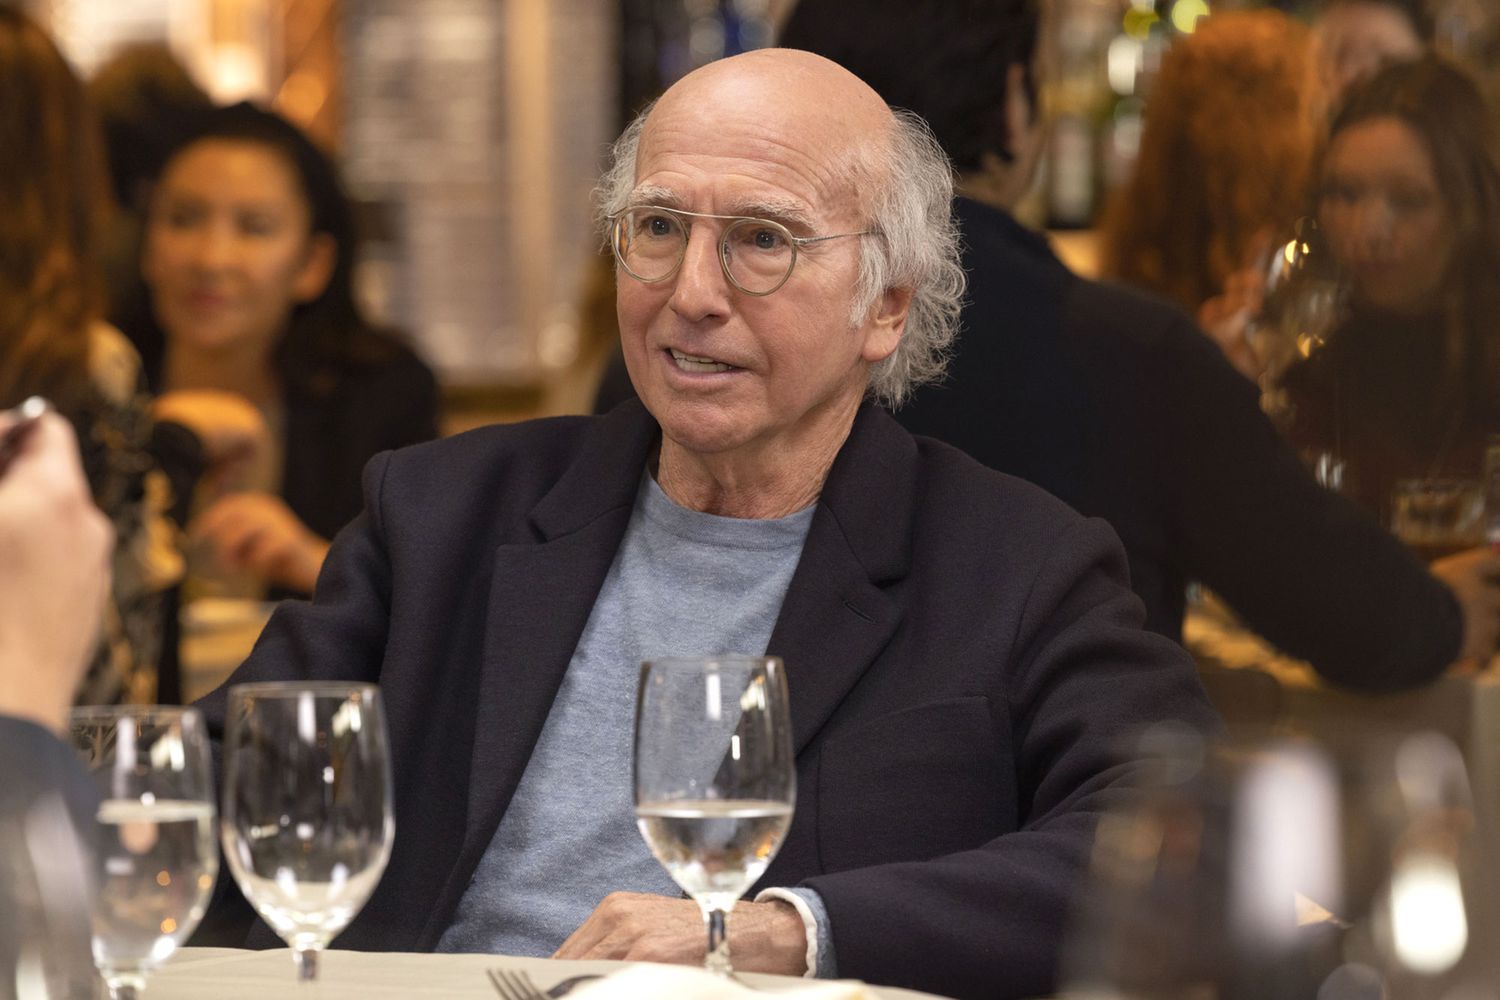 Larry David on 'Curb Your Enthusiasm'